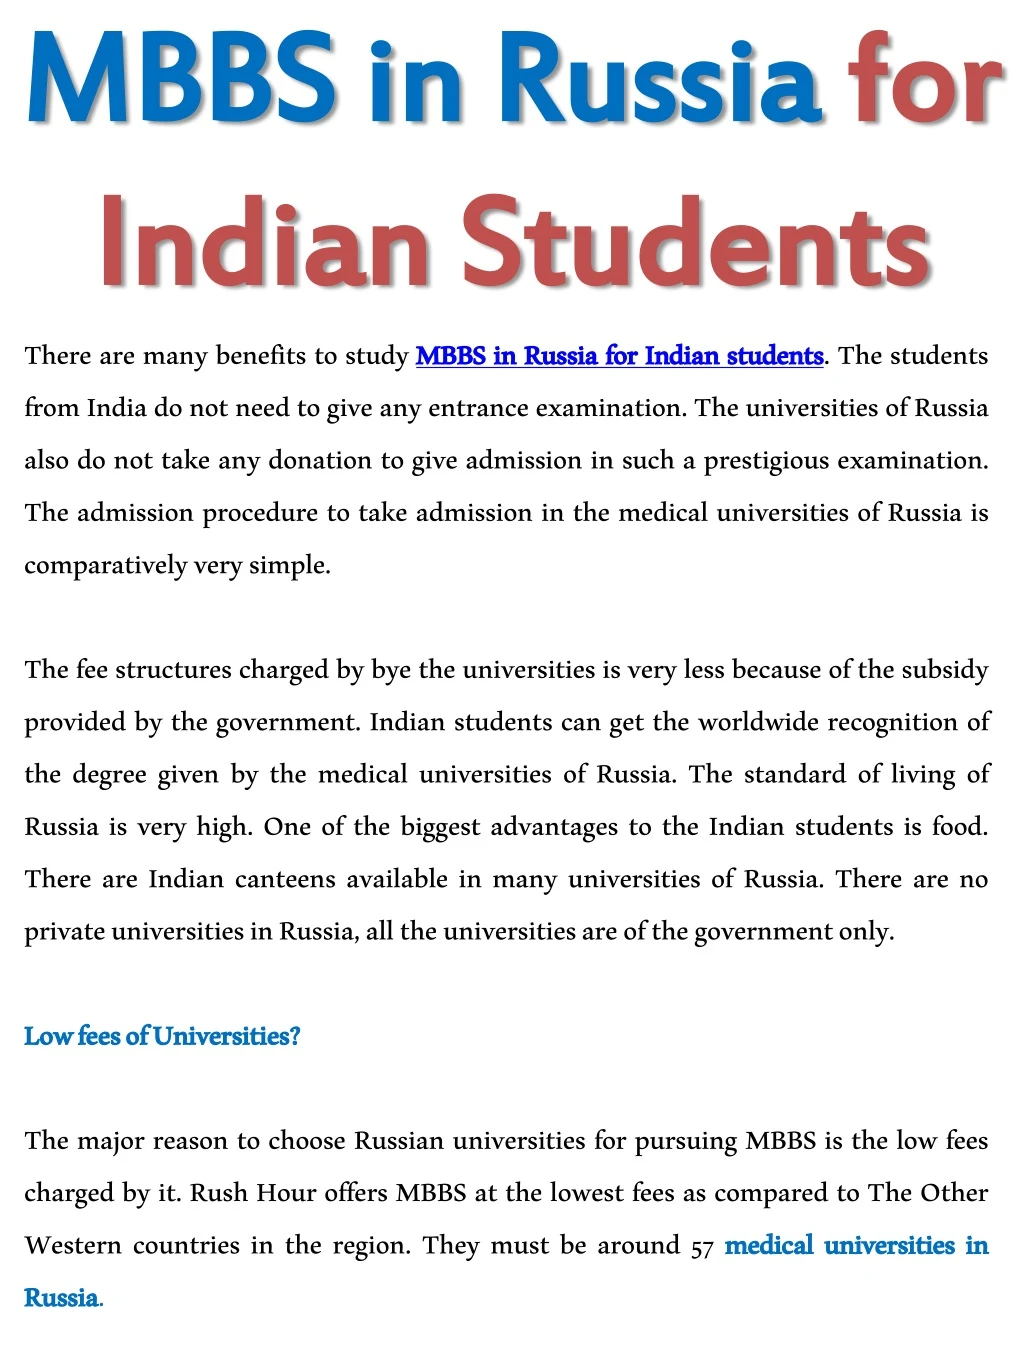 mbbs in russia mbbs in russia for indian students